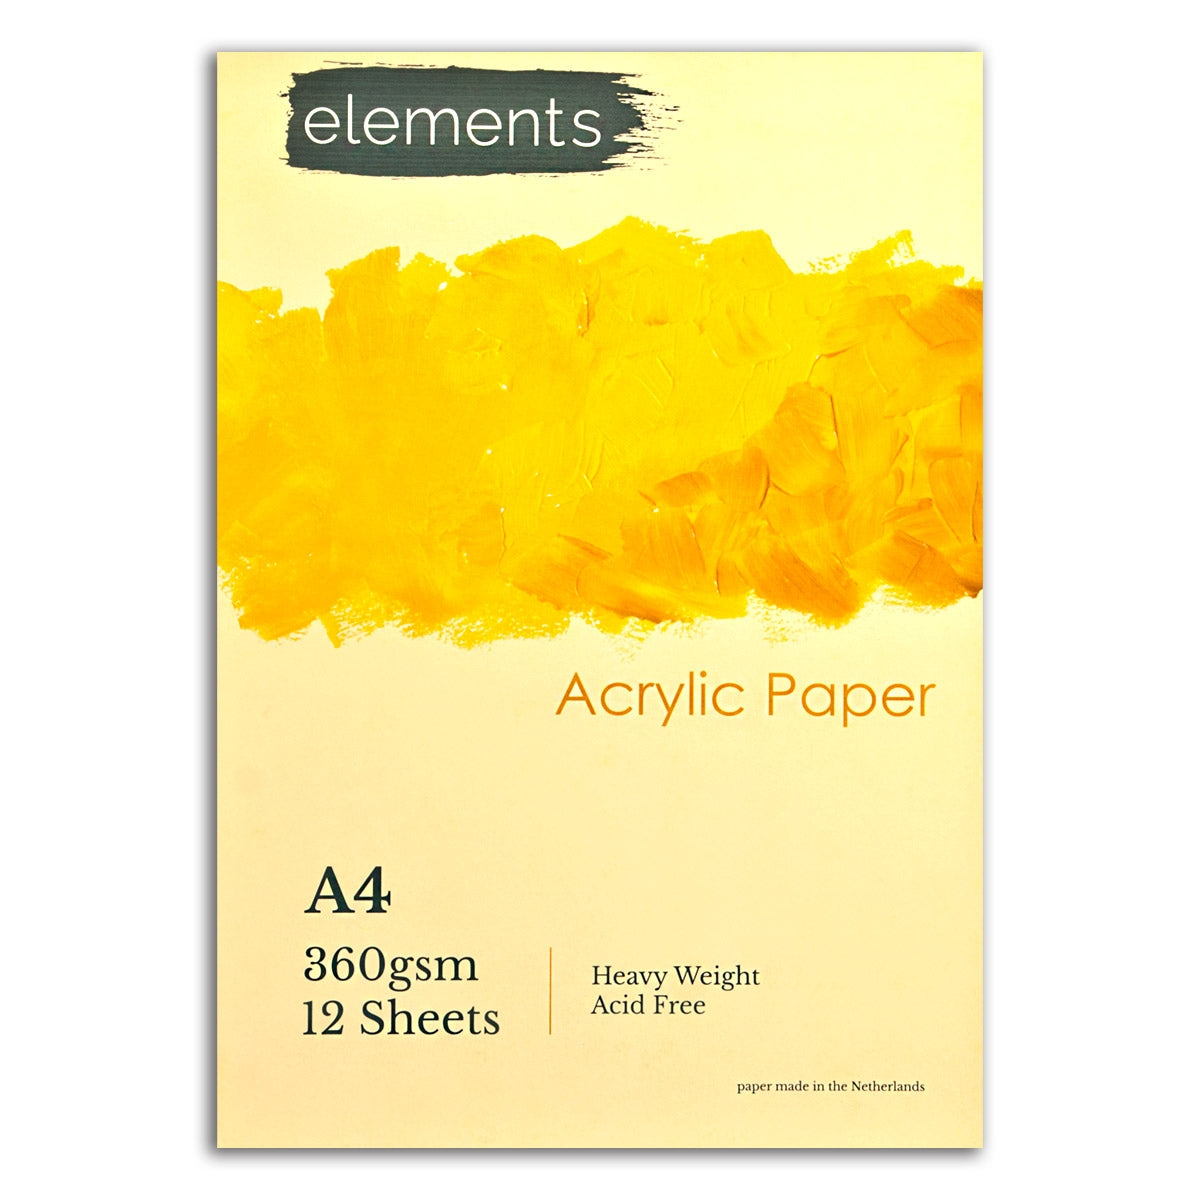 Elements Acrylic Pad - 360gsm - 12 Sheets - A4